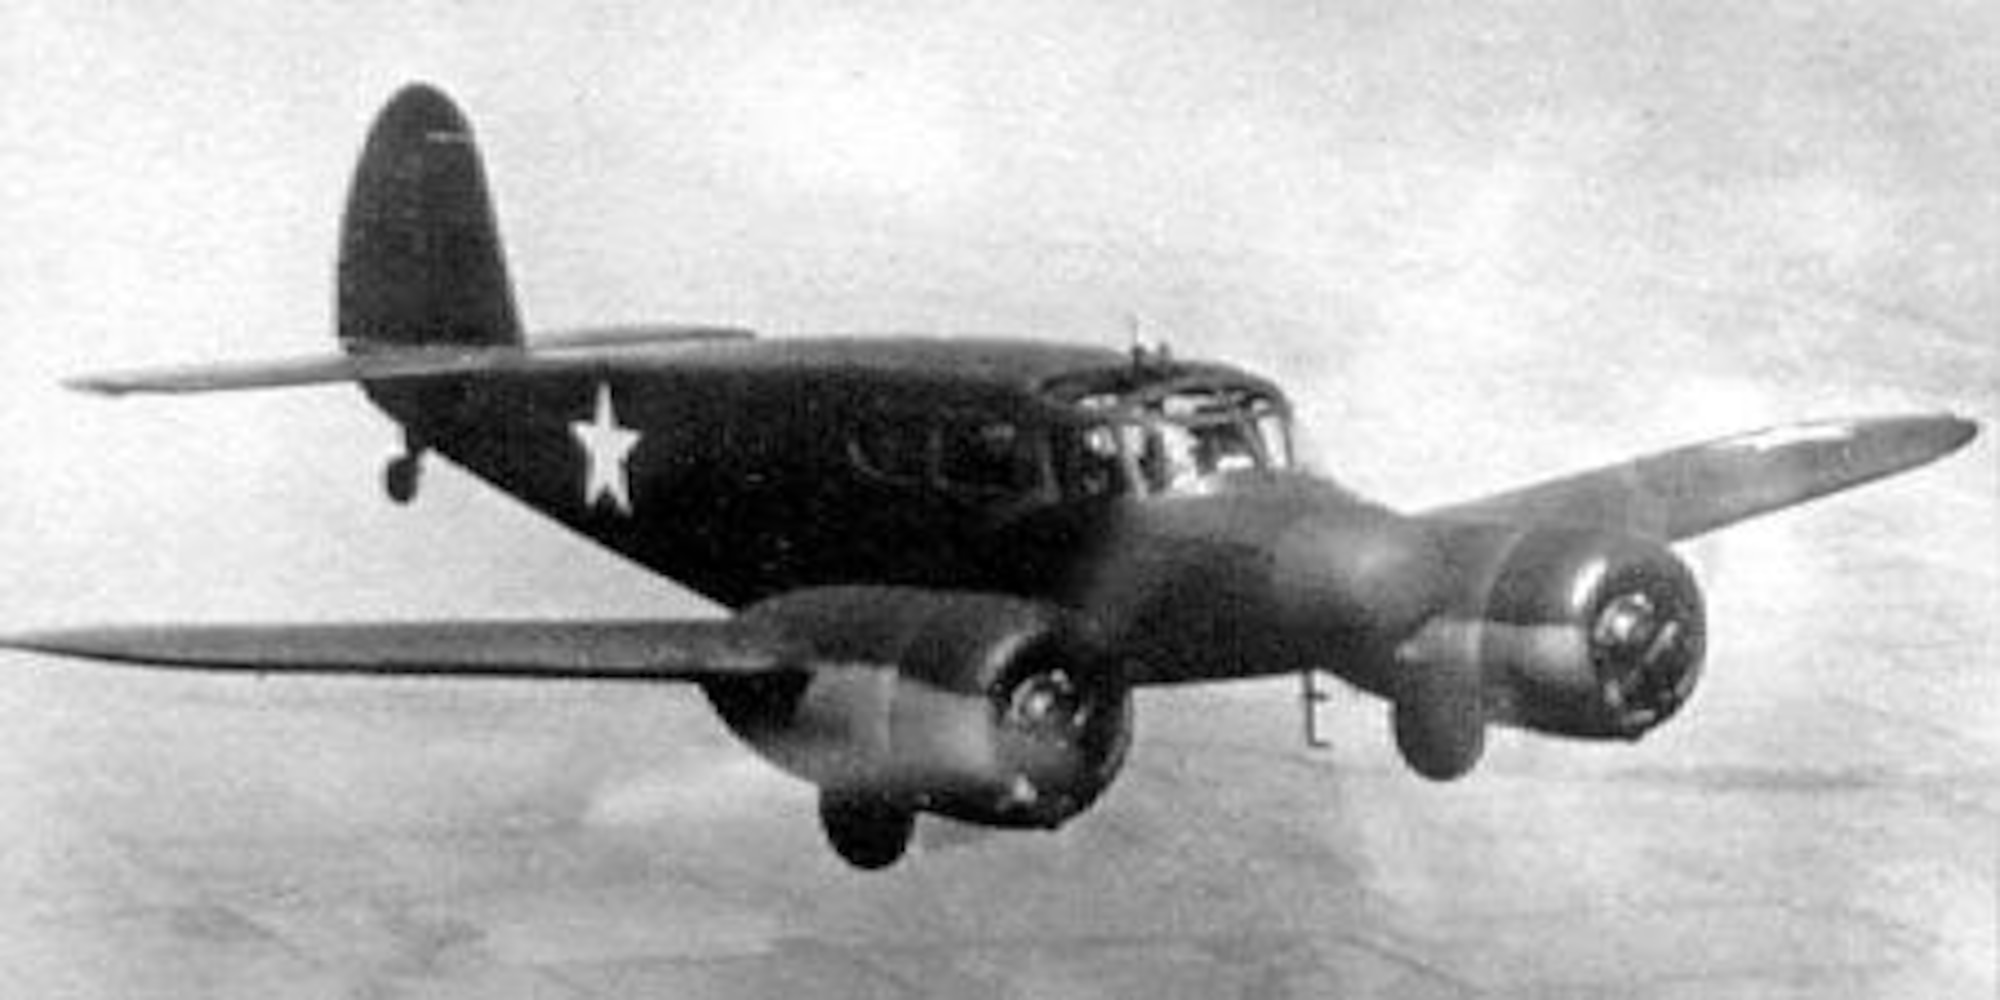 The Cessna AT-17 was a reliable trainer that was quite easy to fly. (U.S. Air Force photo)